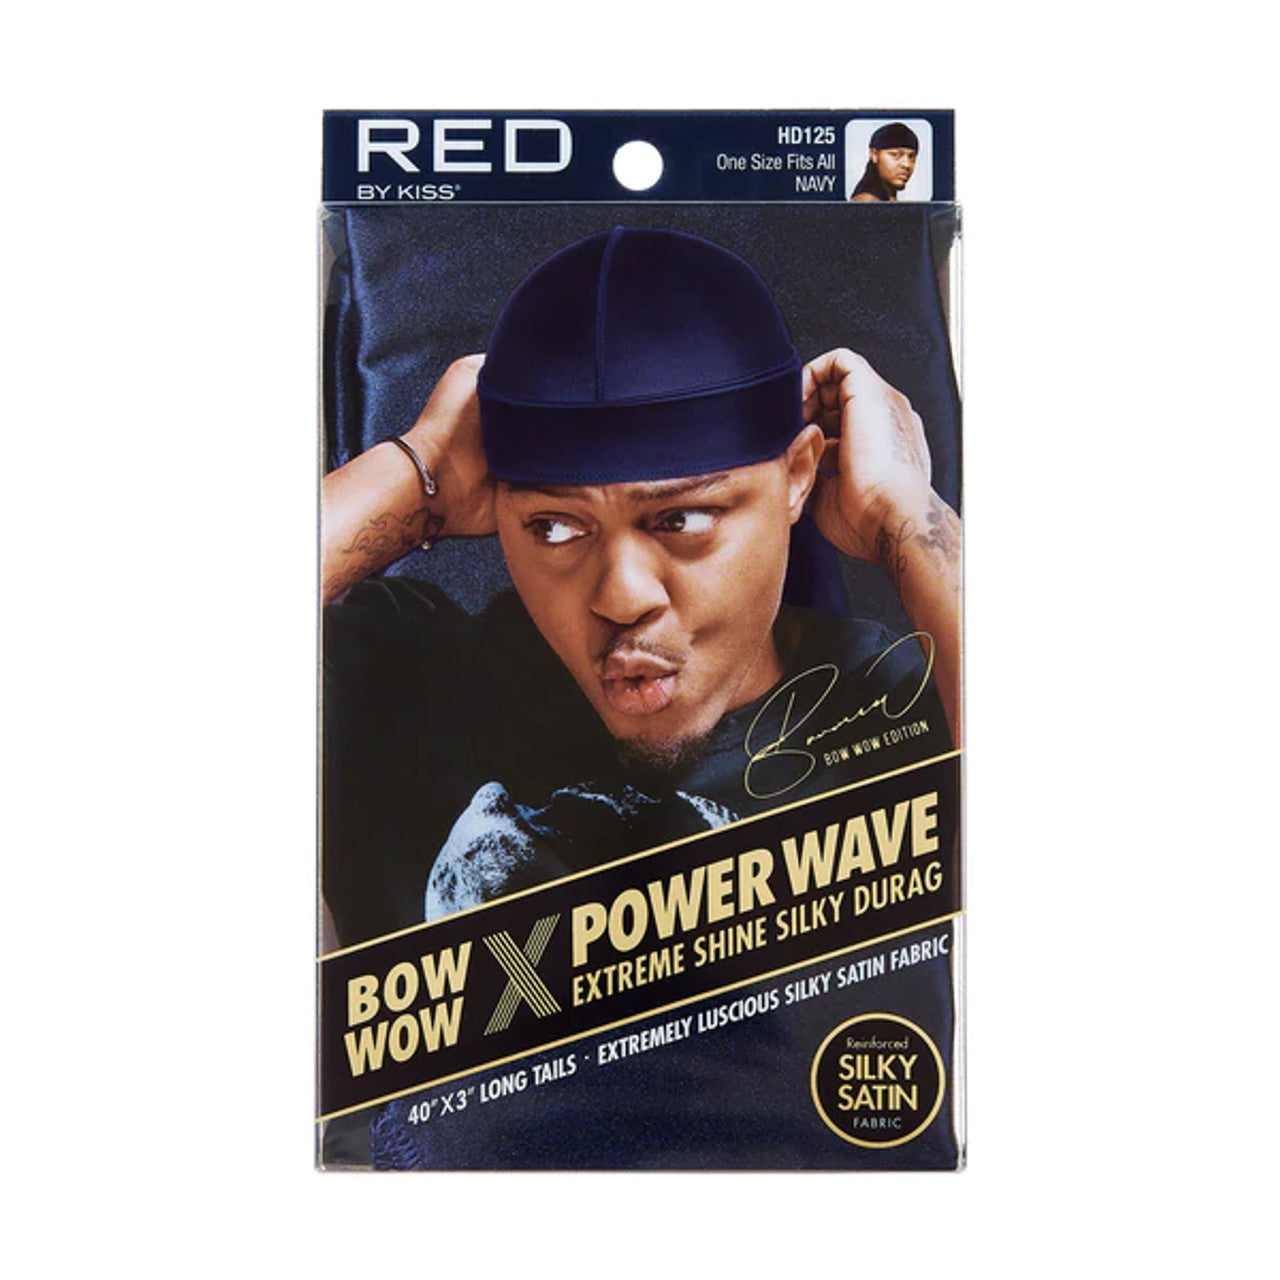 Red by Kiss Bow Wow X Power Wave Extreme Shine Silky Durag - Navy Blue - #HD125